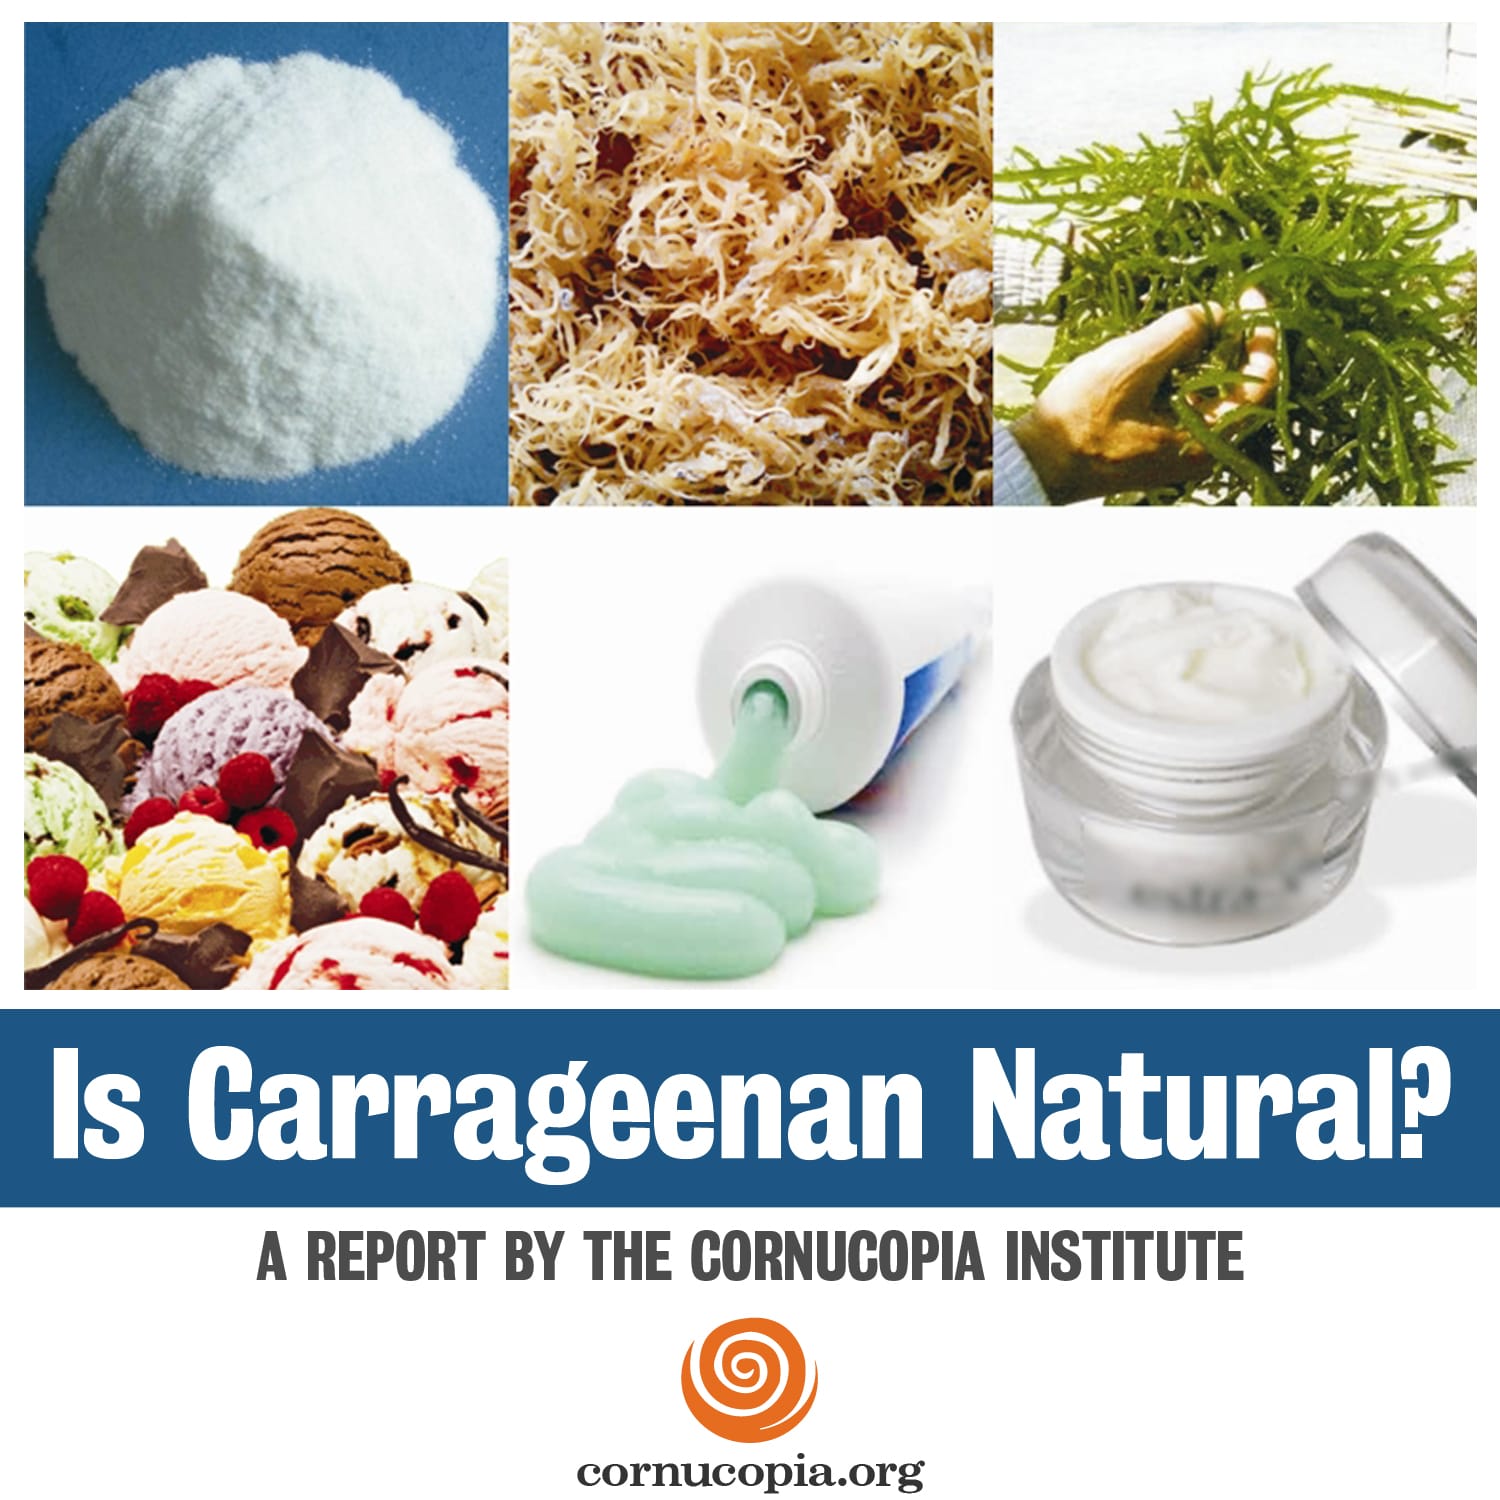 What Is Carrageenan?